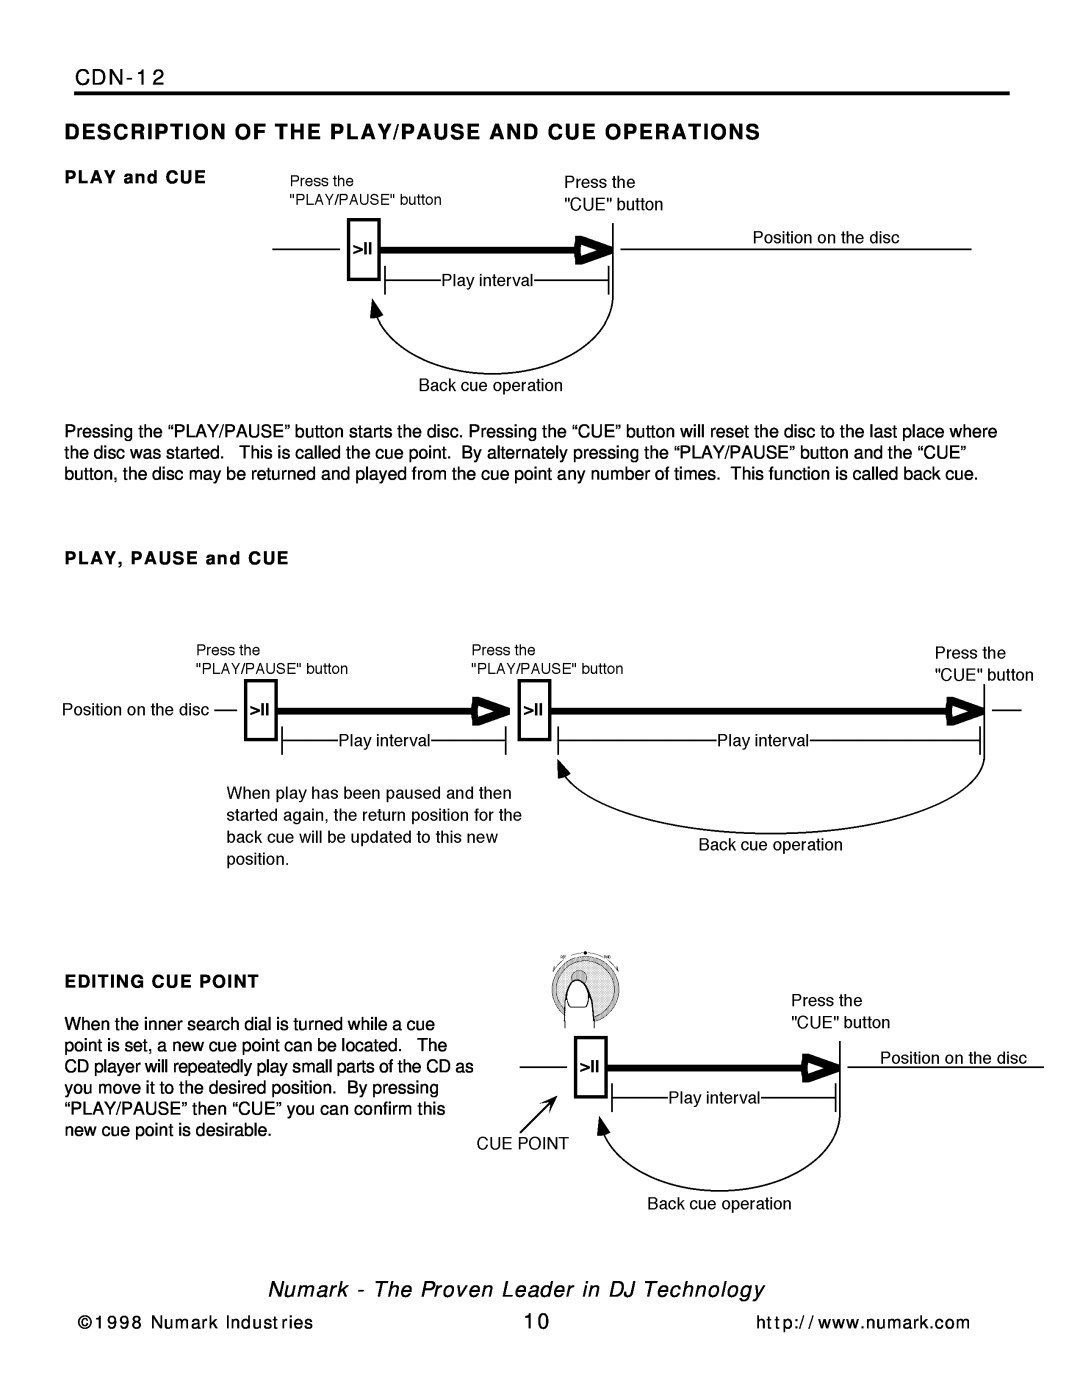 Numark Industries CDN-12 Description Of The Play/Pause And Cue Operations, Numark - The Proven Leader in DJ Technology 